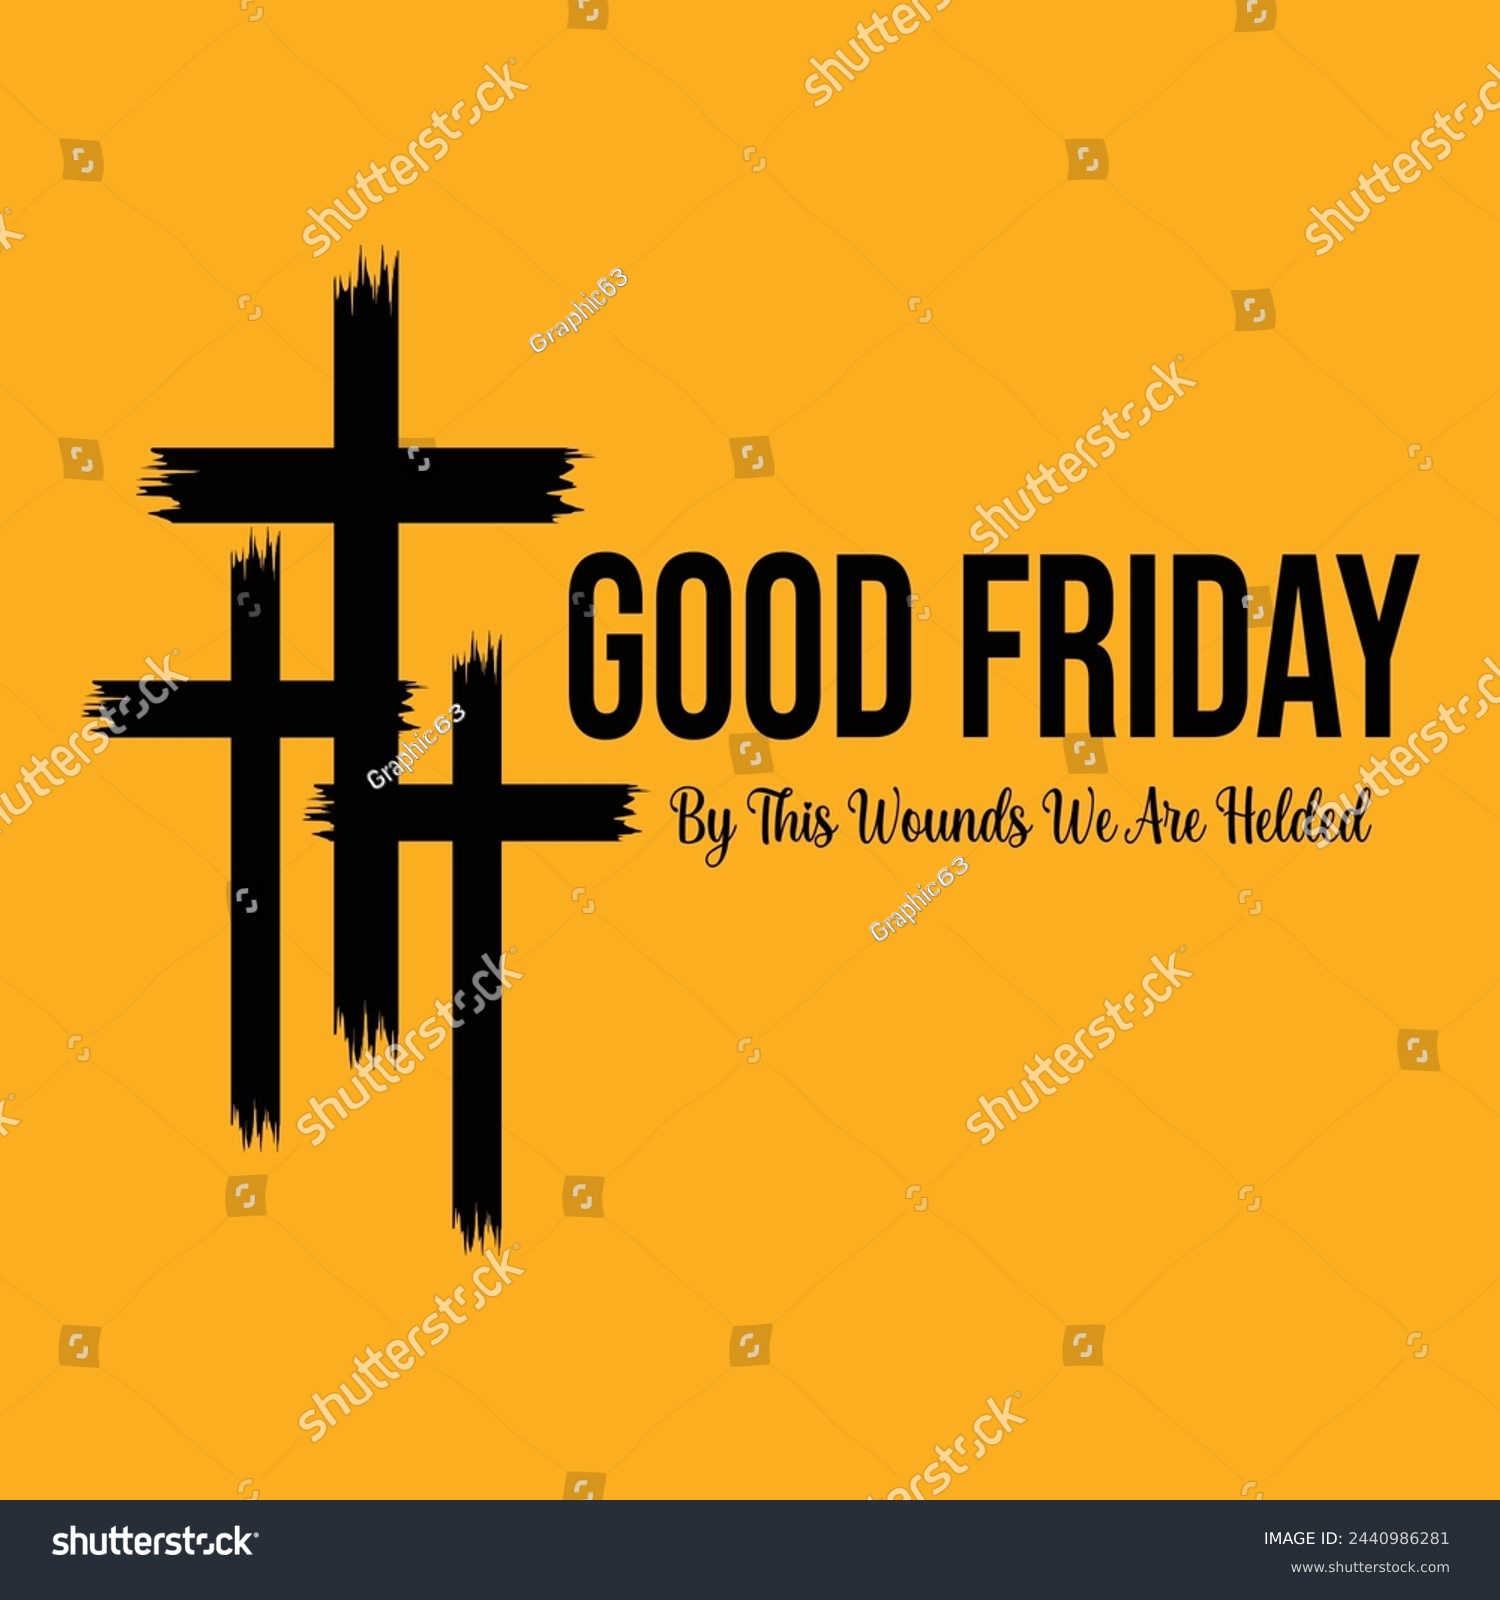 SVG of Good Friday 29 March. Good Friday By This Wounds We are Helded. Motivational Typography Quotes Print For T Shirt, Poster, Design Vector Illustration. svg